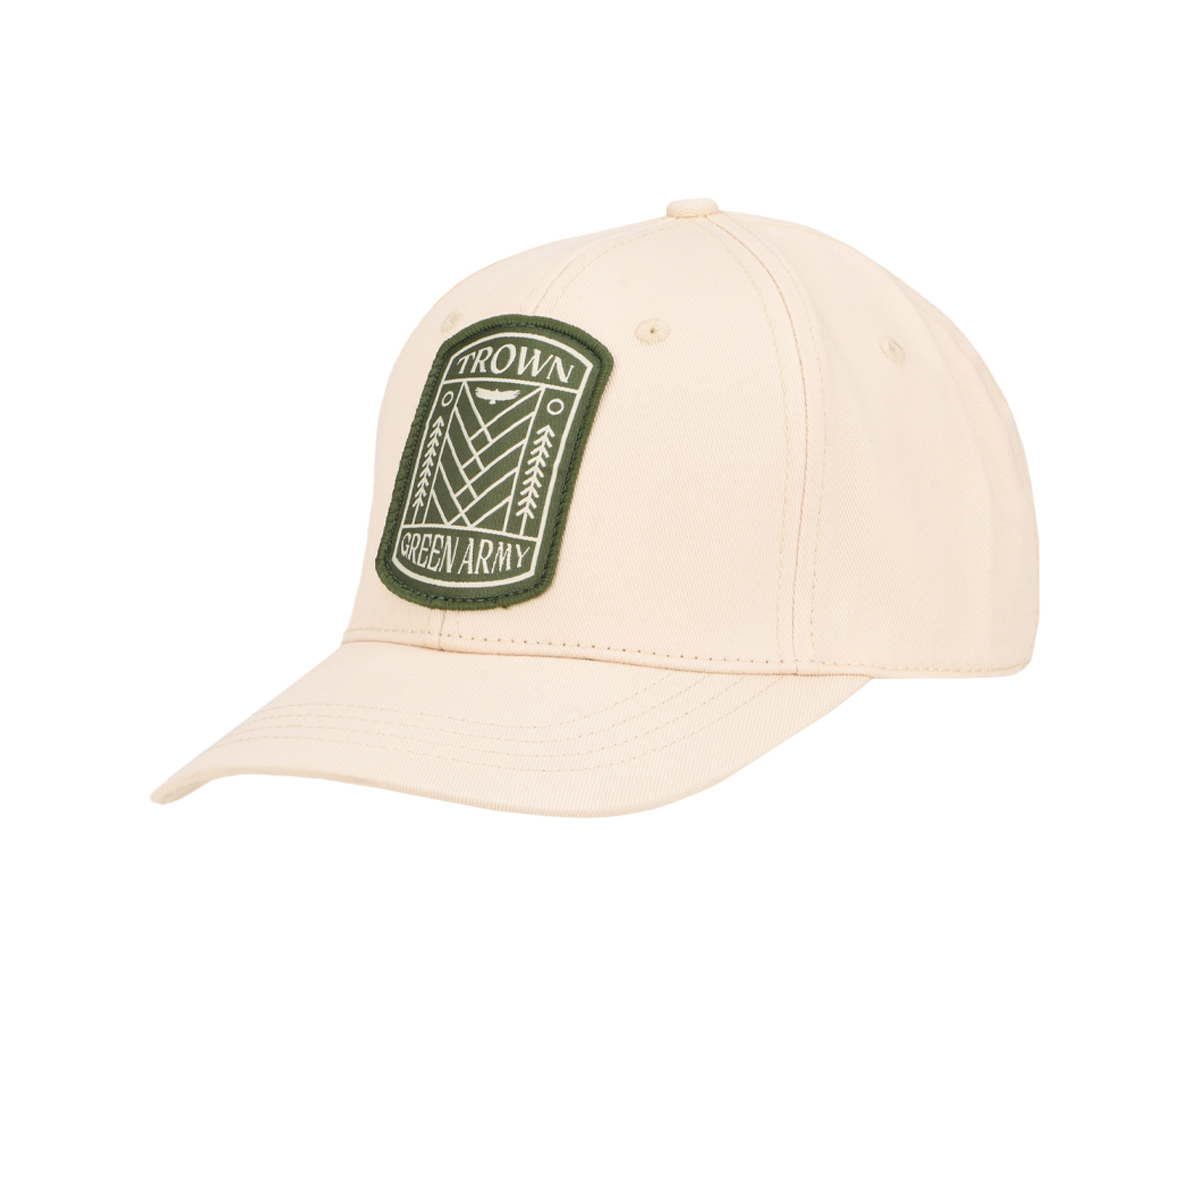 Gorra Trown Green Army,  image number null